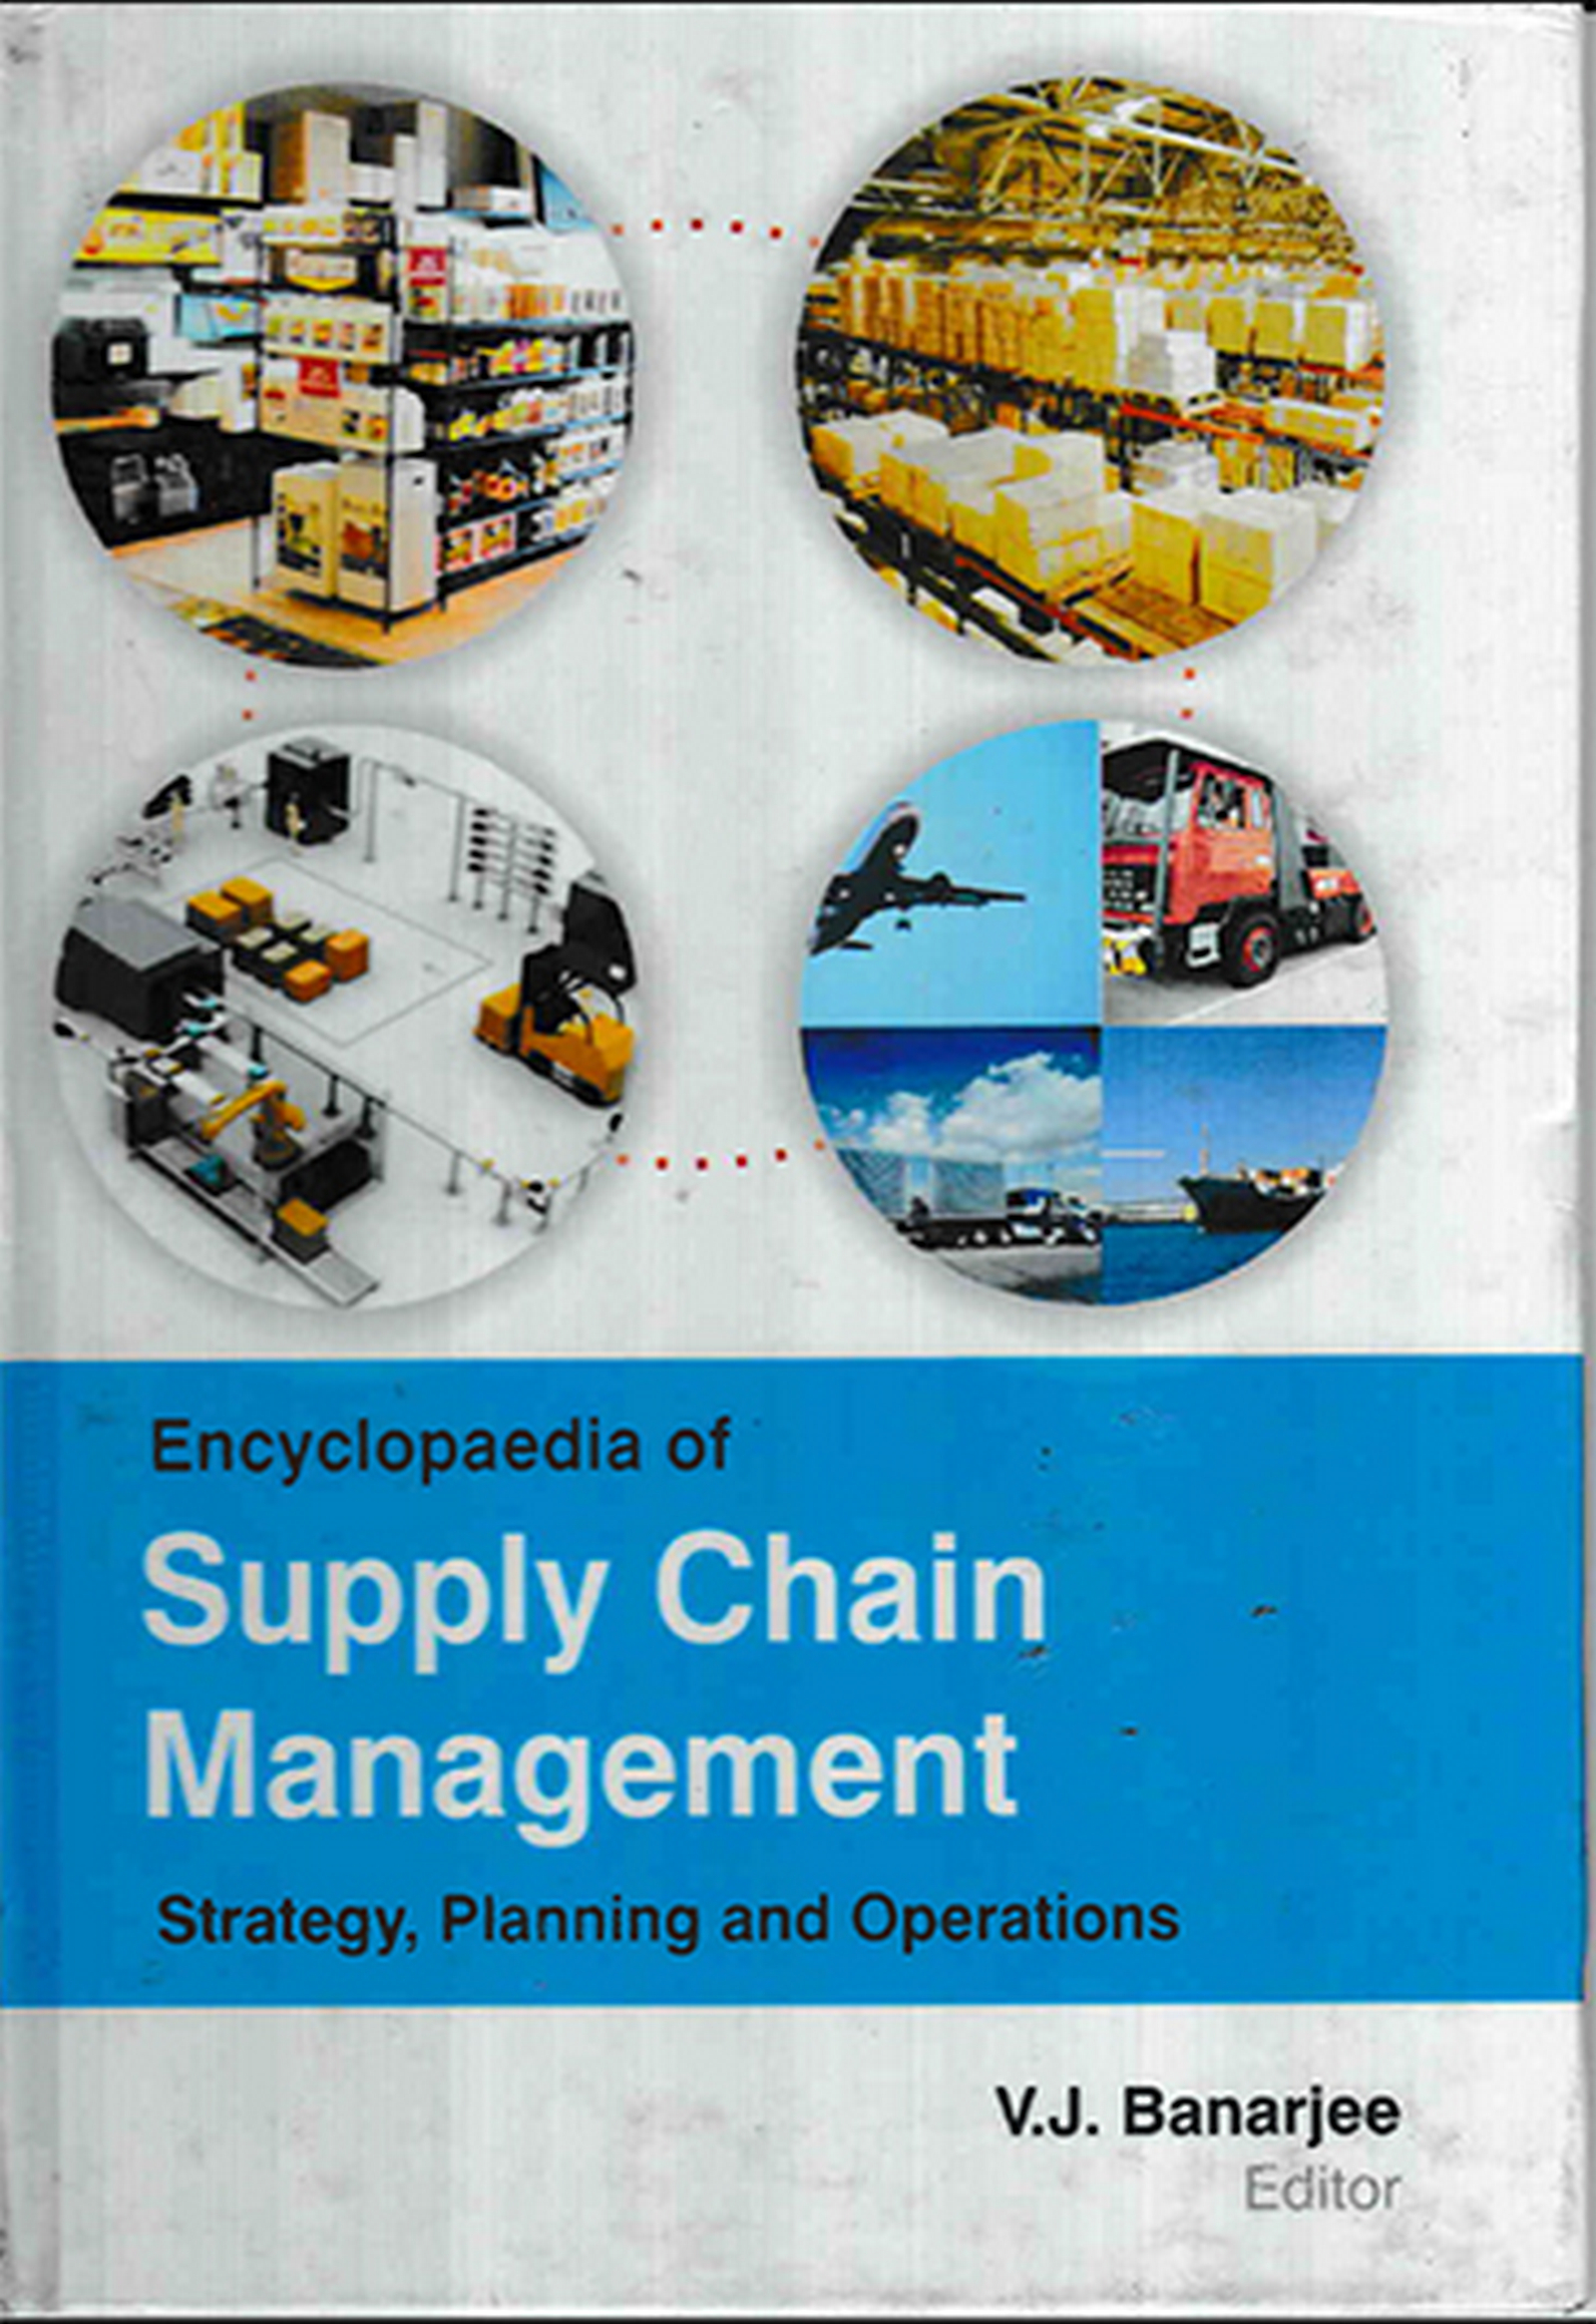 Encyclopaedia of Supply Chain Management Strategy, Planning and Operations Volume-3 (Strategic Logistic Management)